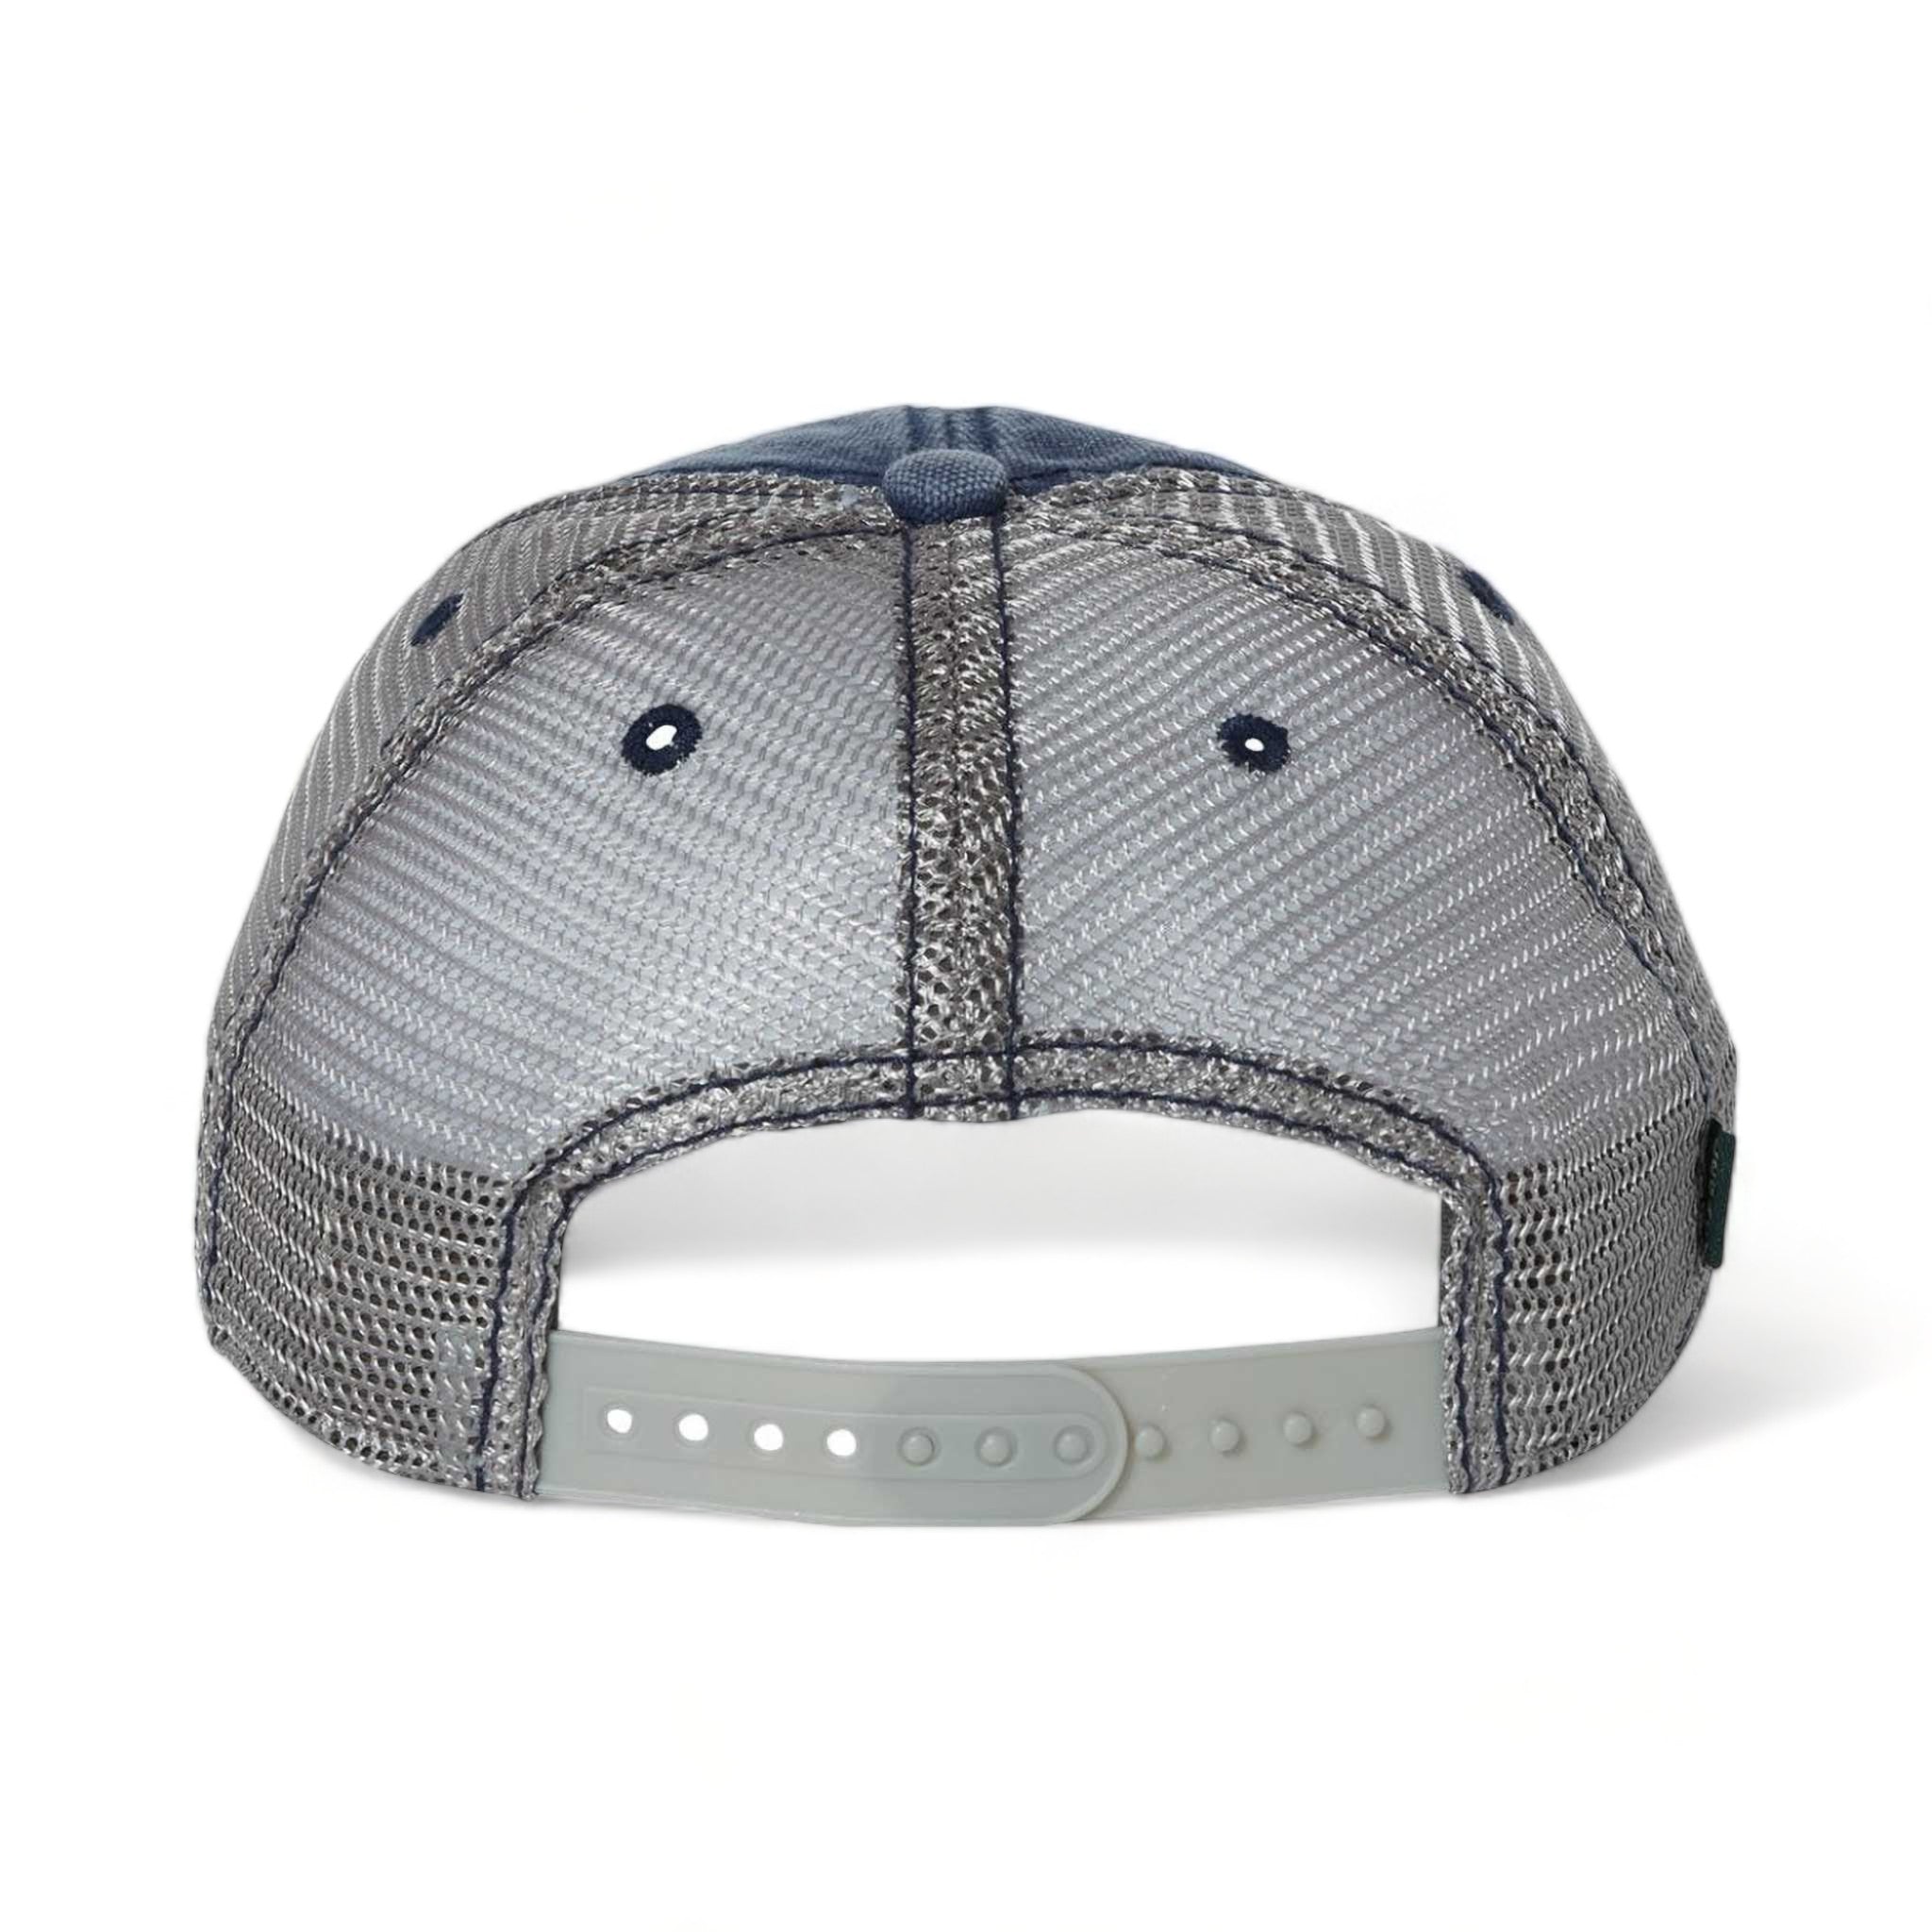 Back view of LEGACY DTA custom hat in navy and grey